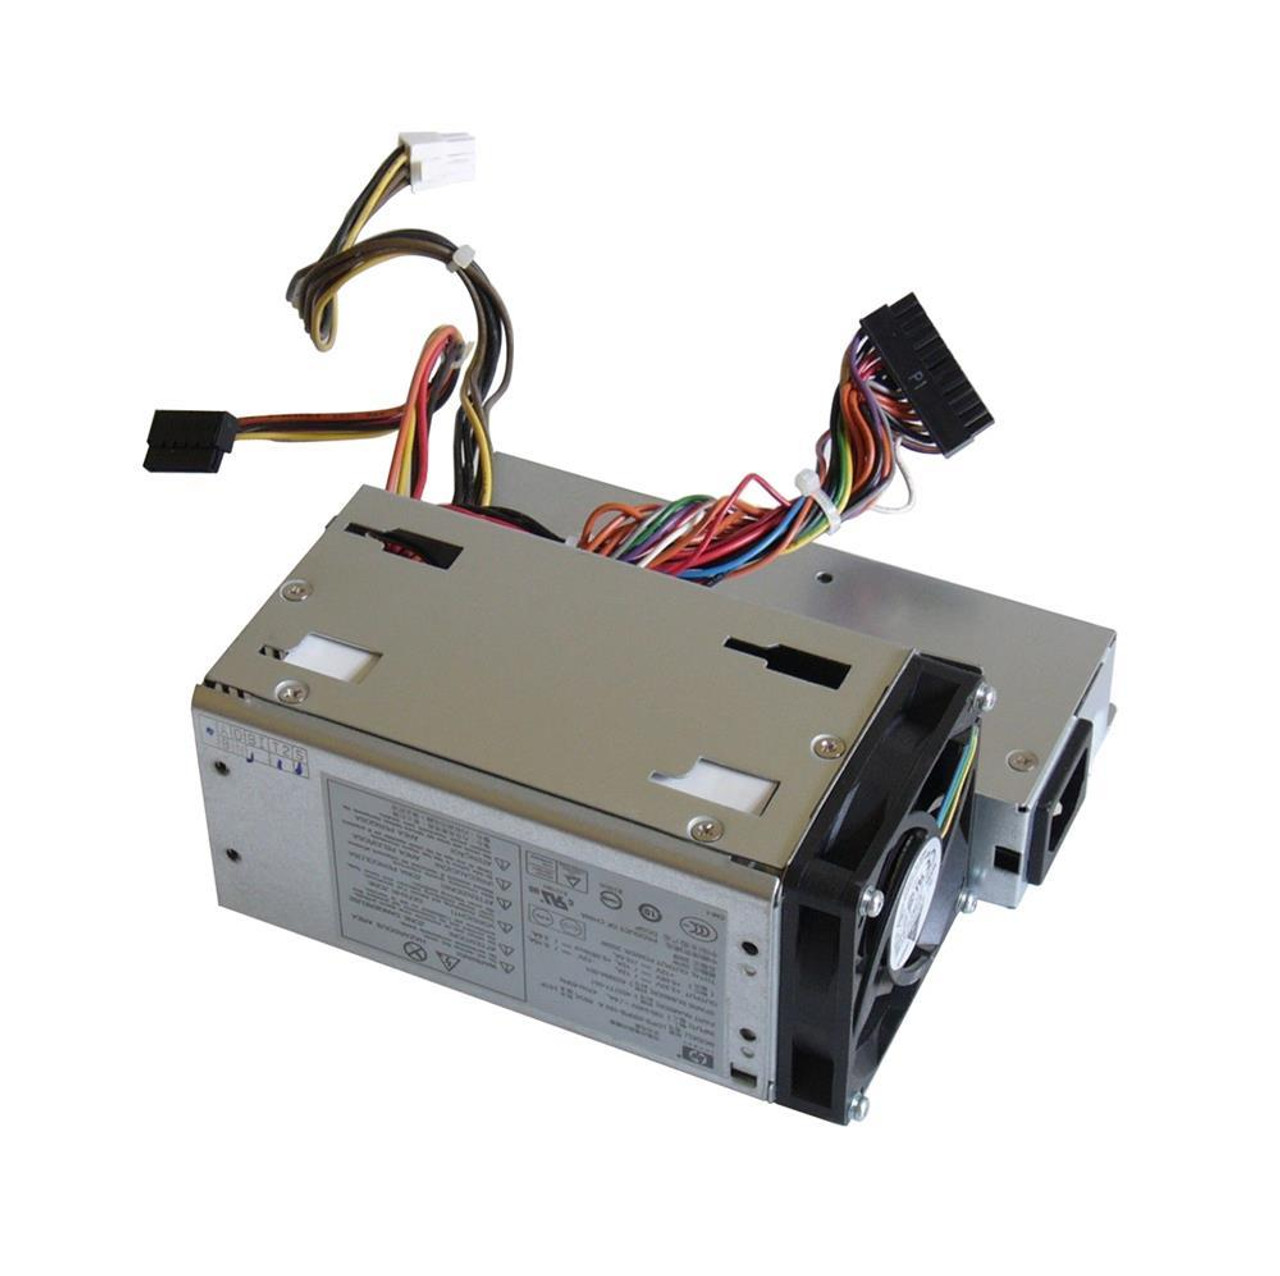 DPS-200PB-163 Compaq 200-Watts ATX AC Power Supply with PFC for DC7600